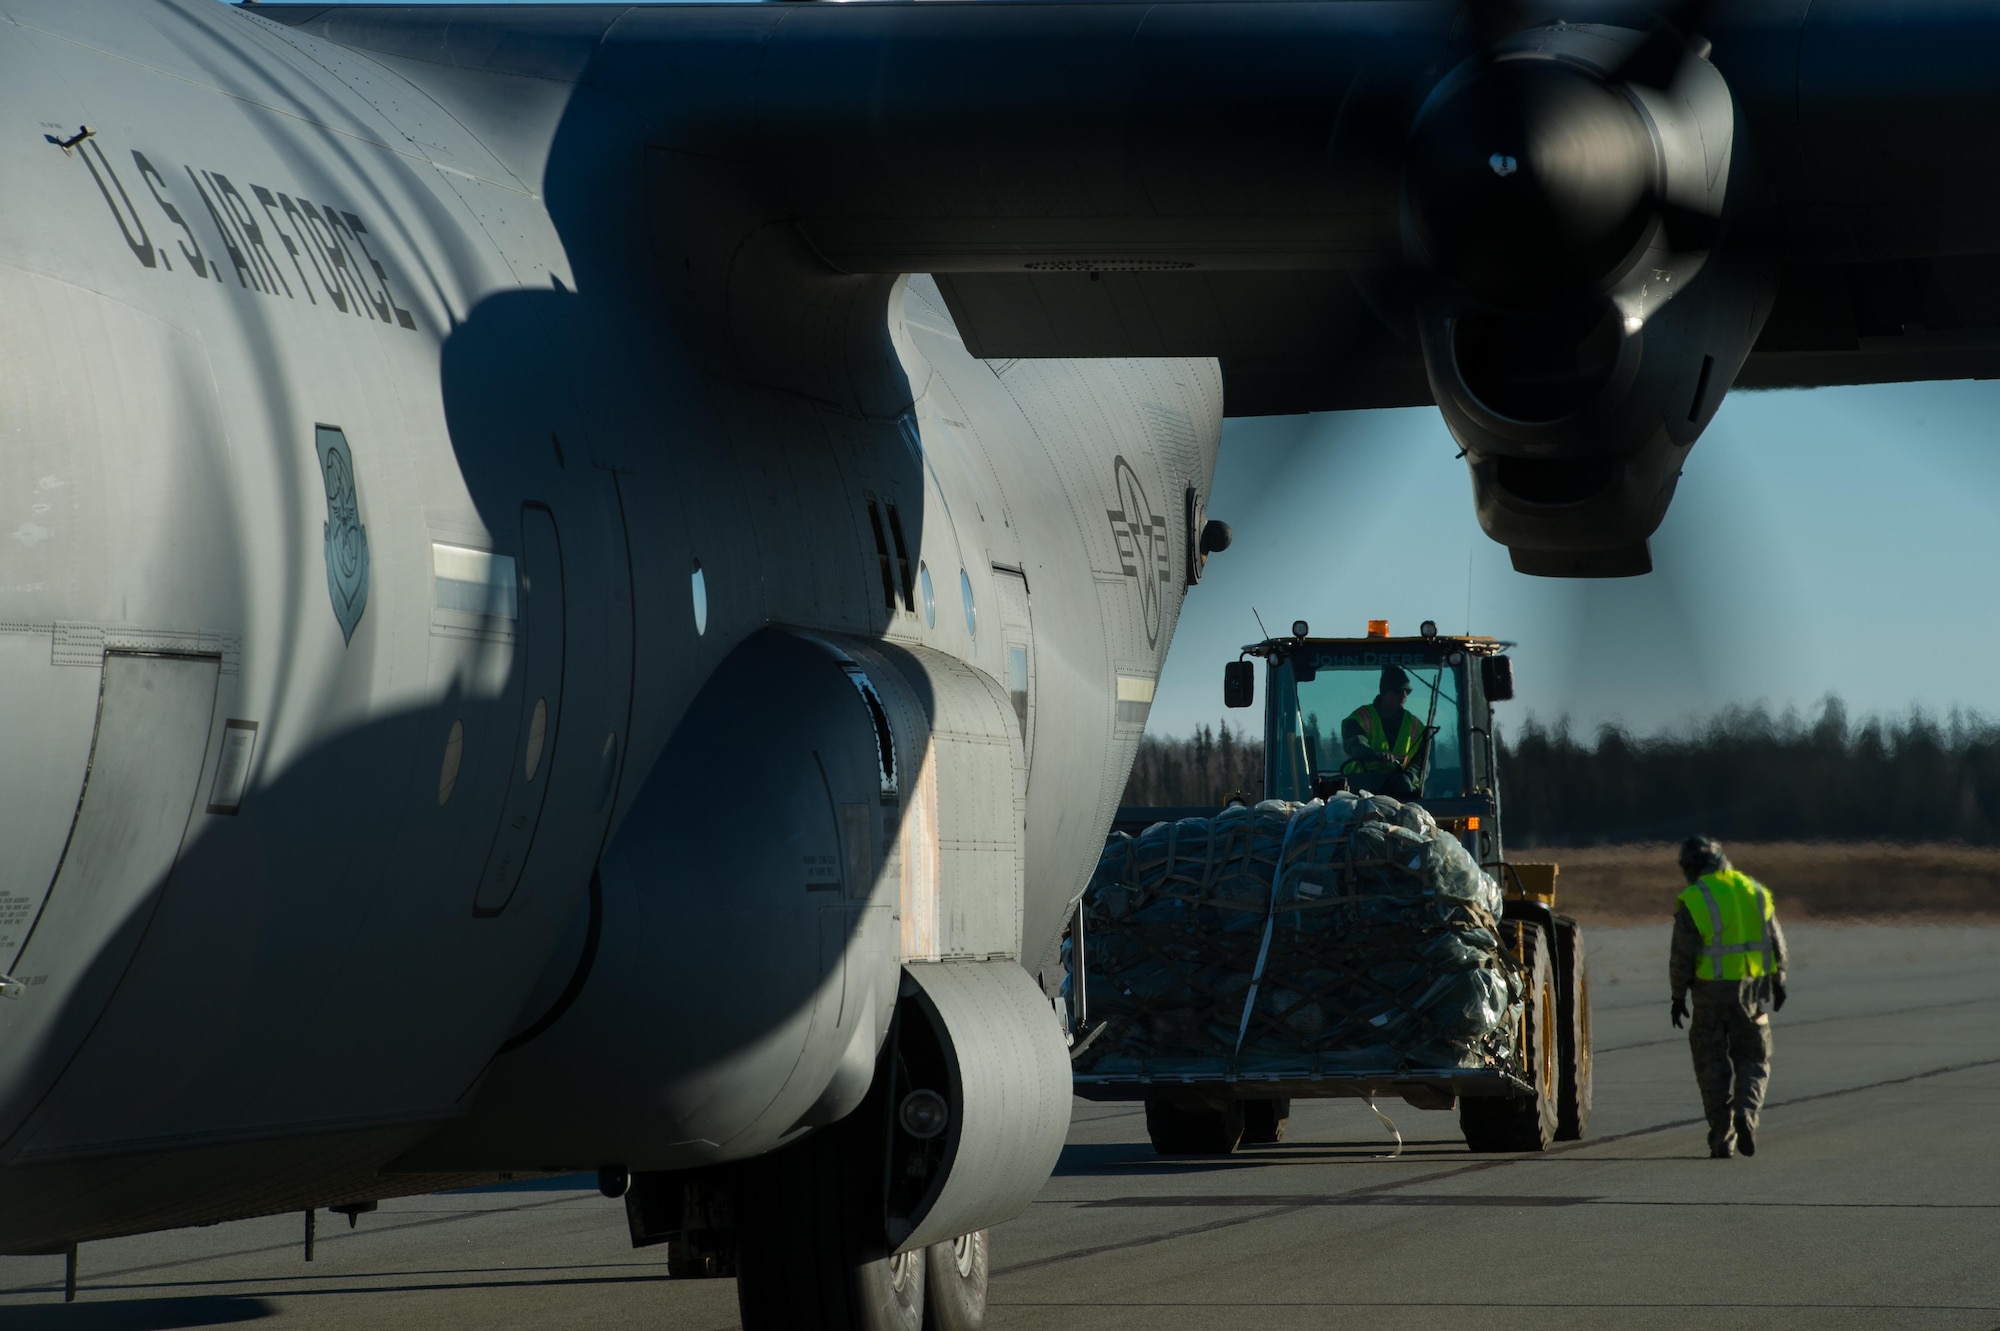 U.S. Airmen with the 621st Contingency Response Wing offload cargo from a C-130J Super Hercules aircraft at Allen Army Airfield, Alaska during exercise RED FLAG-Alaska, Oct. 13, 2016. RF-A is a series of Pacific Air Forces commander-directed field training exercises for U.S. and partner nation forces, providing combined offensive counter-air, interdiction, close air support, and large force employment training in a simulated combat environment. (U.S. Air Force photo by Master Sgt. Joseph Swafford)
